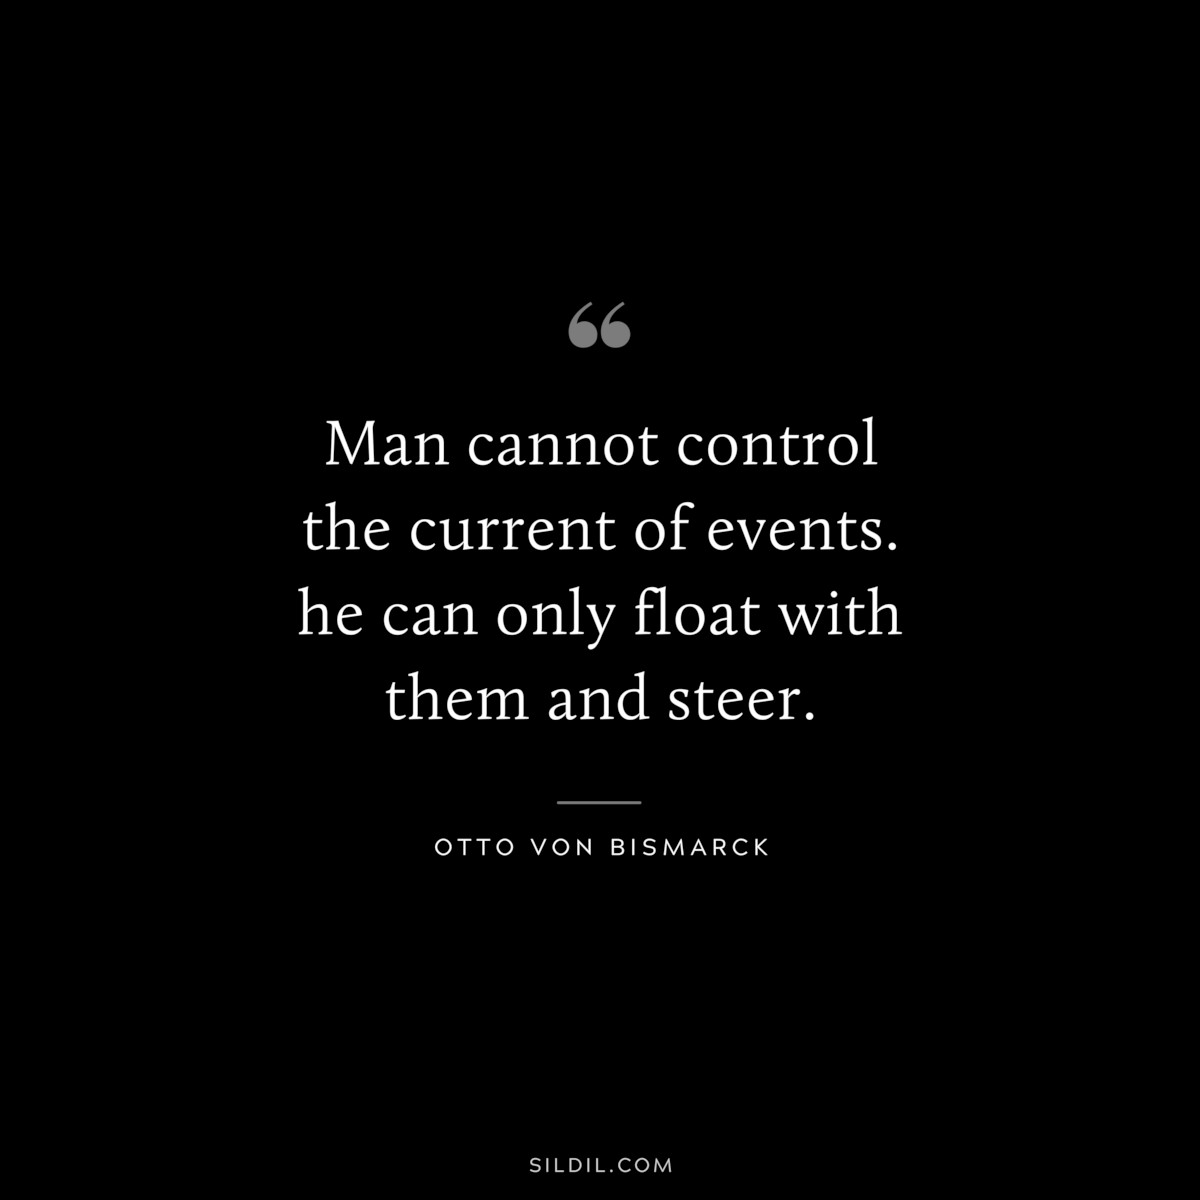 Man cannot control the current of events. he can only float with them and steer. ― Otto von Bismarck